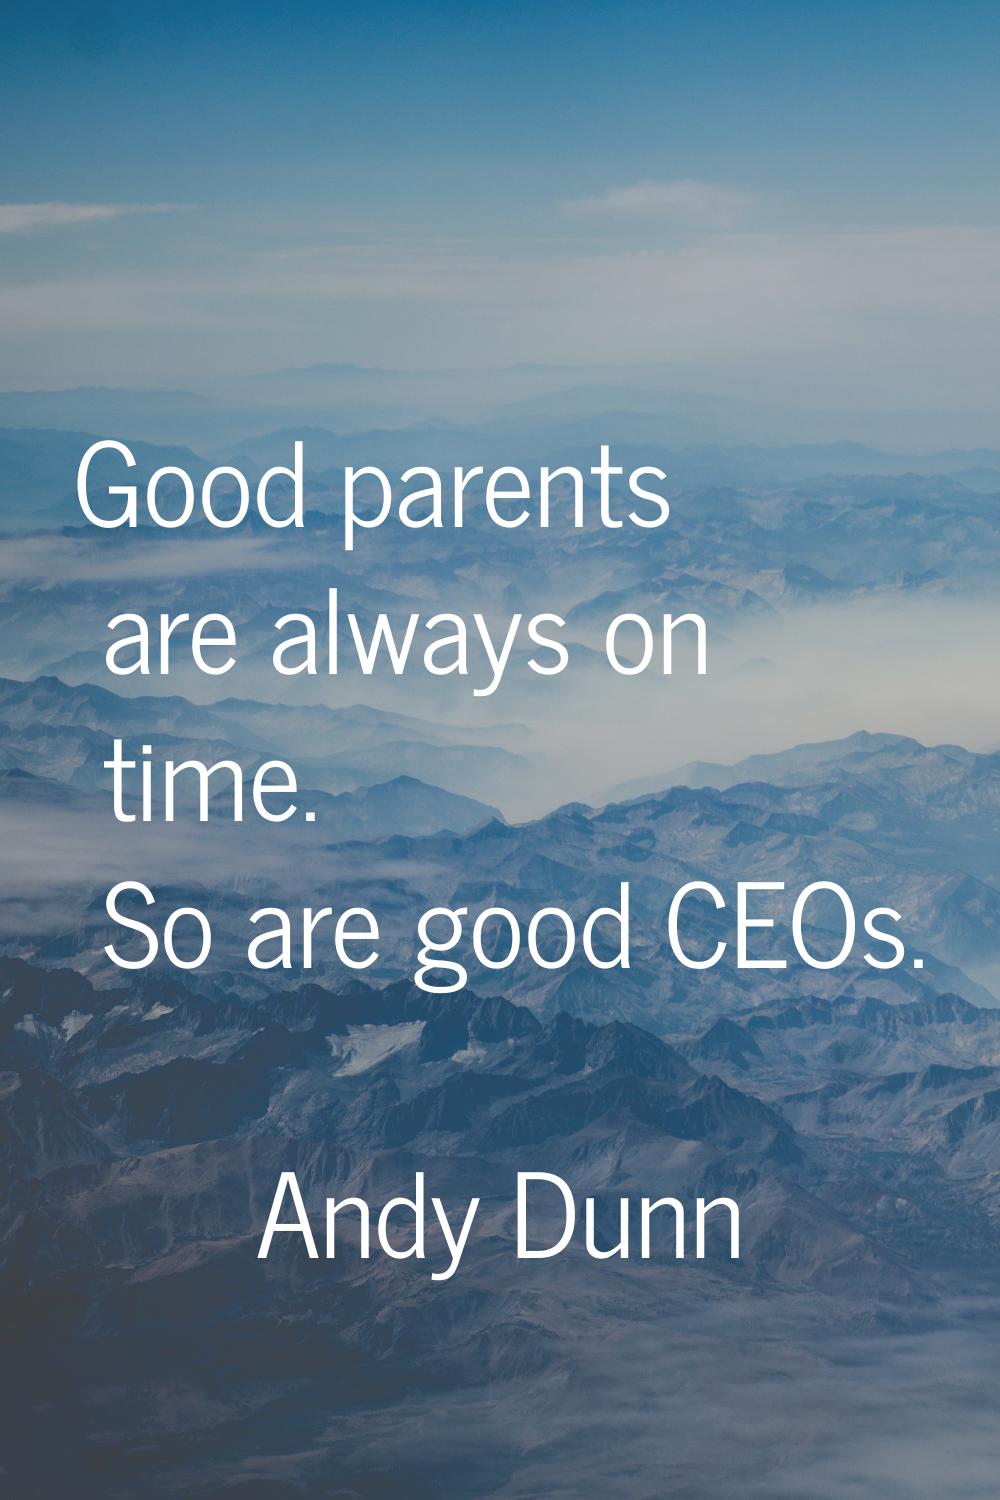 Good parents are always on time. So are good CEOs.